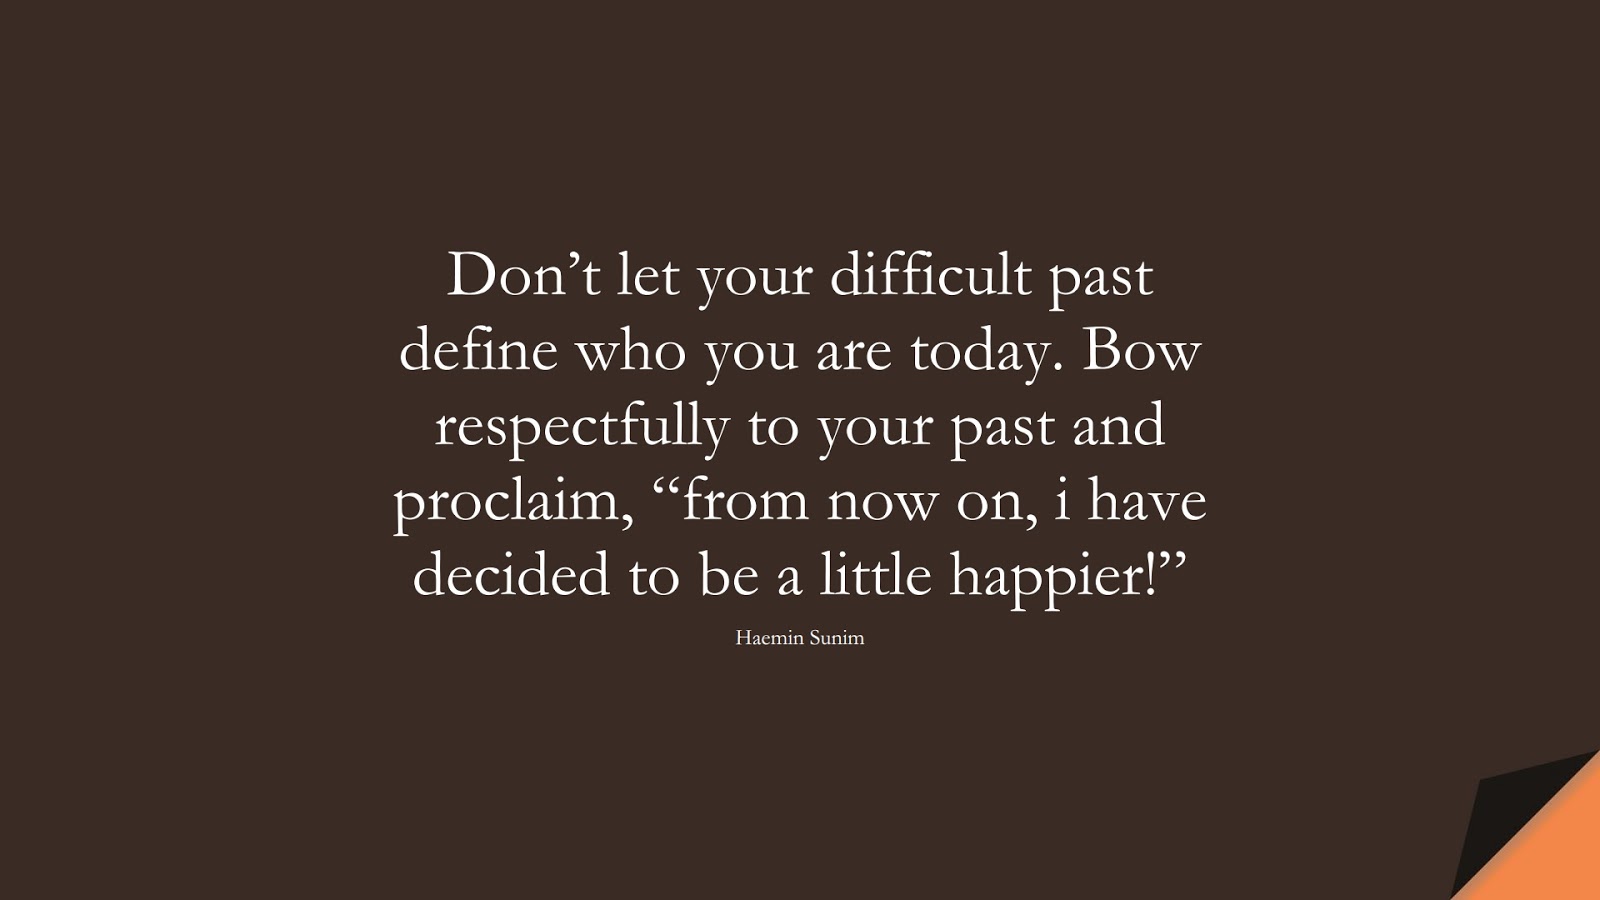 Don’t let your difficult past define who you are today. Bow respectfully to your past and proclaim, “from now on, i have decided to be a little happier!” (Haemin Sunim);  #DepressionQuotes